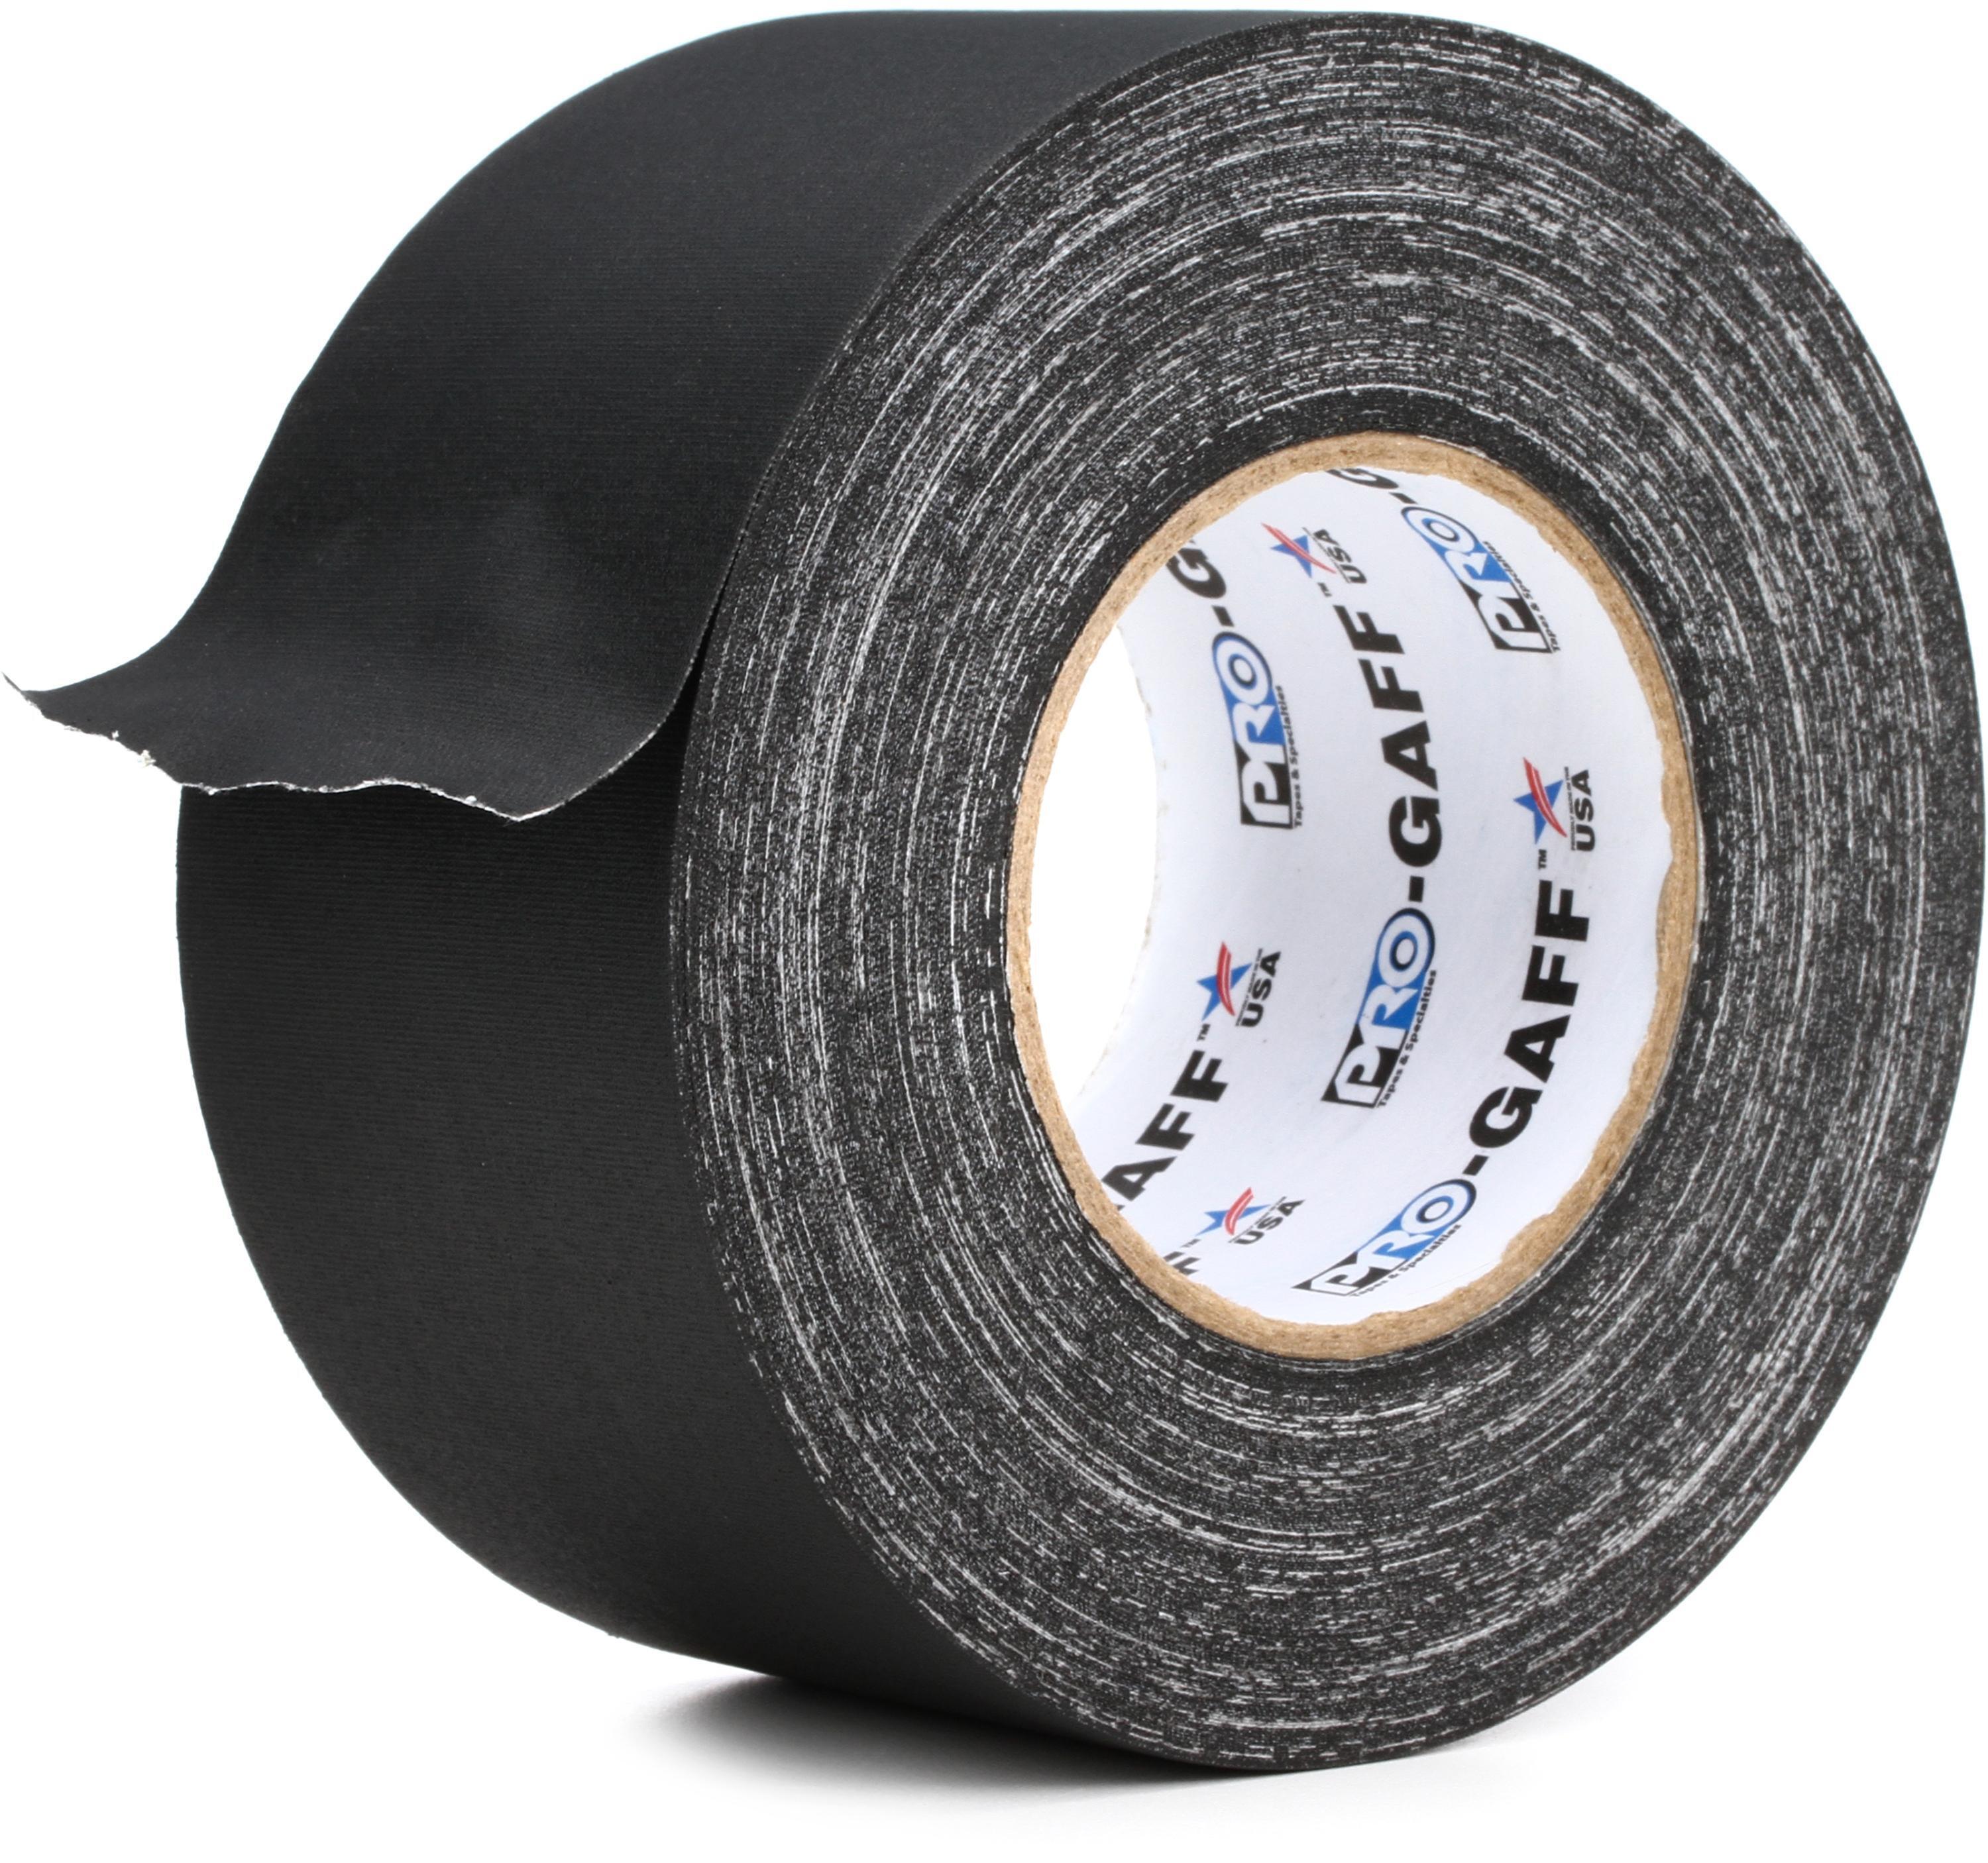 Pro　Gaff　Tapes　Pro　Premium　Tape　3-inch　Gaffers　55-yard　Roll　Black　Sweetwater